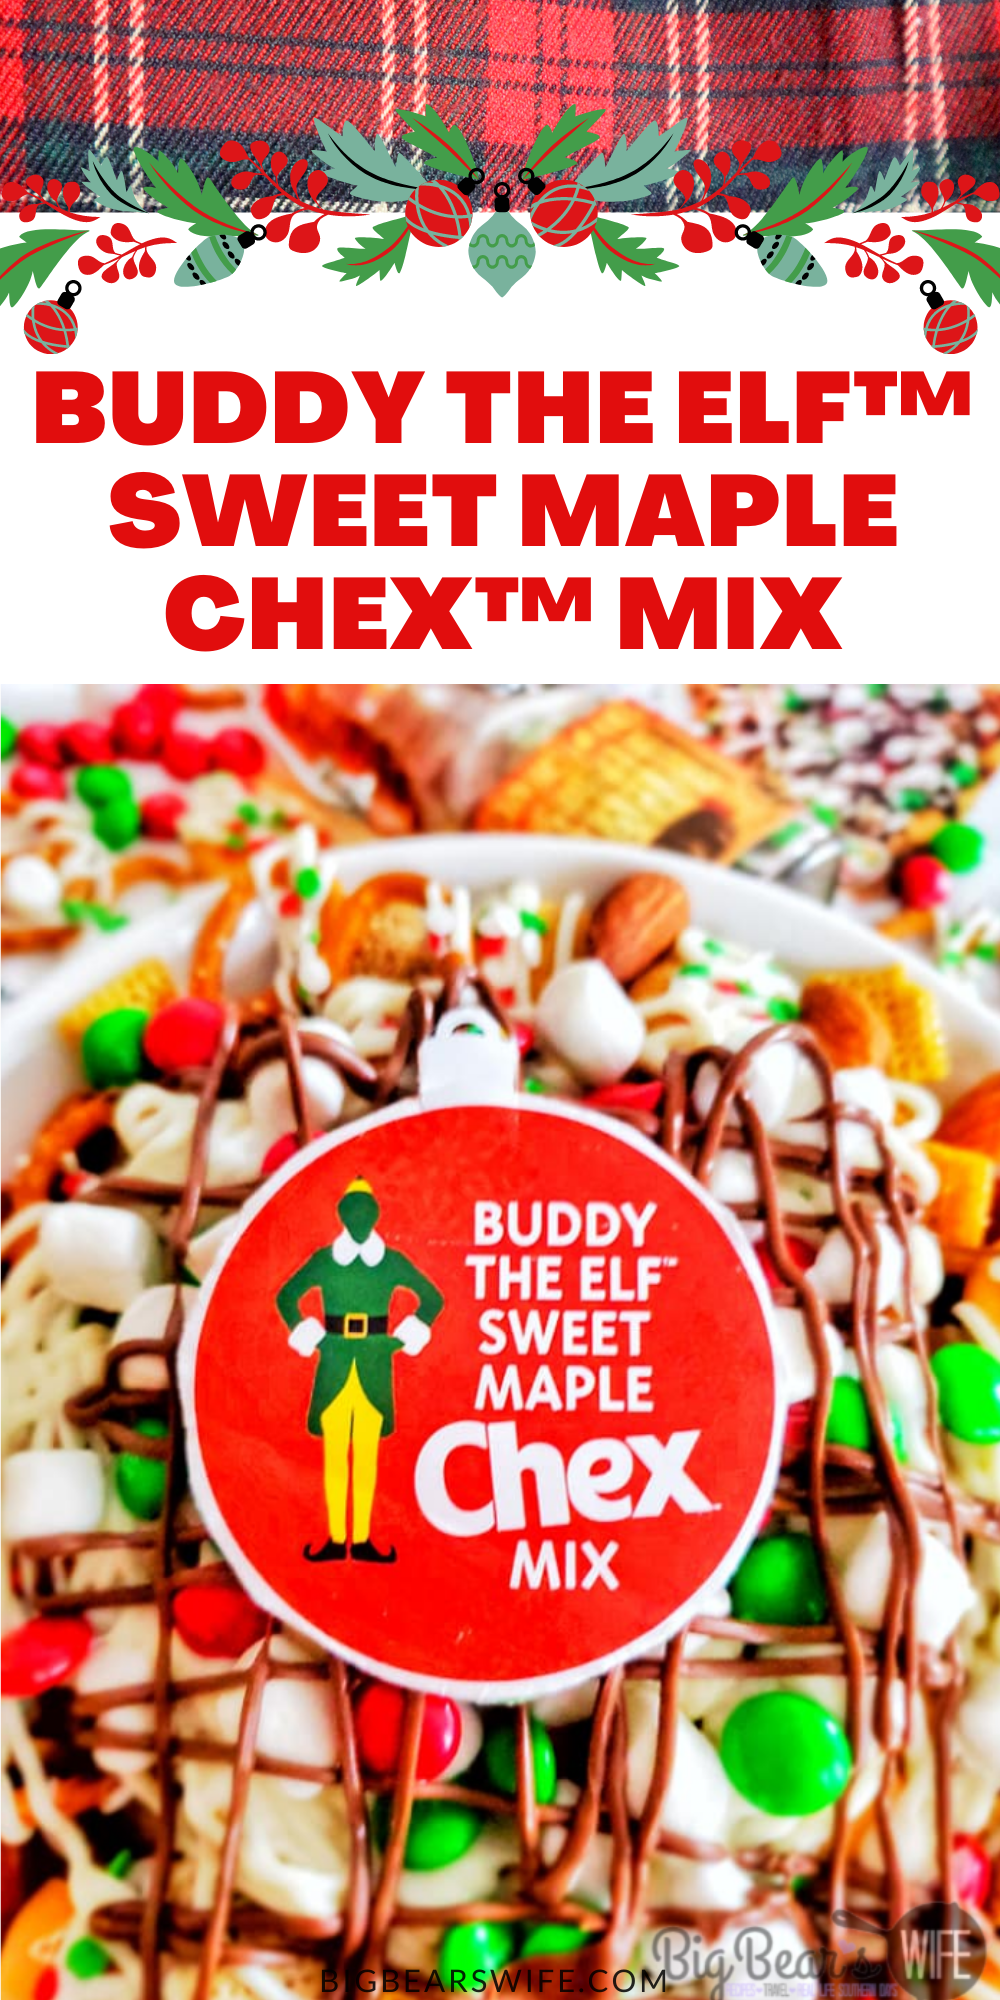 Buddy The Elf Sweet Maple Chex Mix is a chex mix version of Buddy the Elf's Breakfast Spaghetti! Maple-sweetened Chex, Cinnamon Chex, mini cookies and pretzels get topped with white chocolate “spaghetti, M&Ms and mini marshmallows. Don't forget the melted chocolate for the "Chocolate Syrup" drizzle! via @bigbearswife